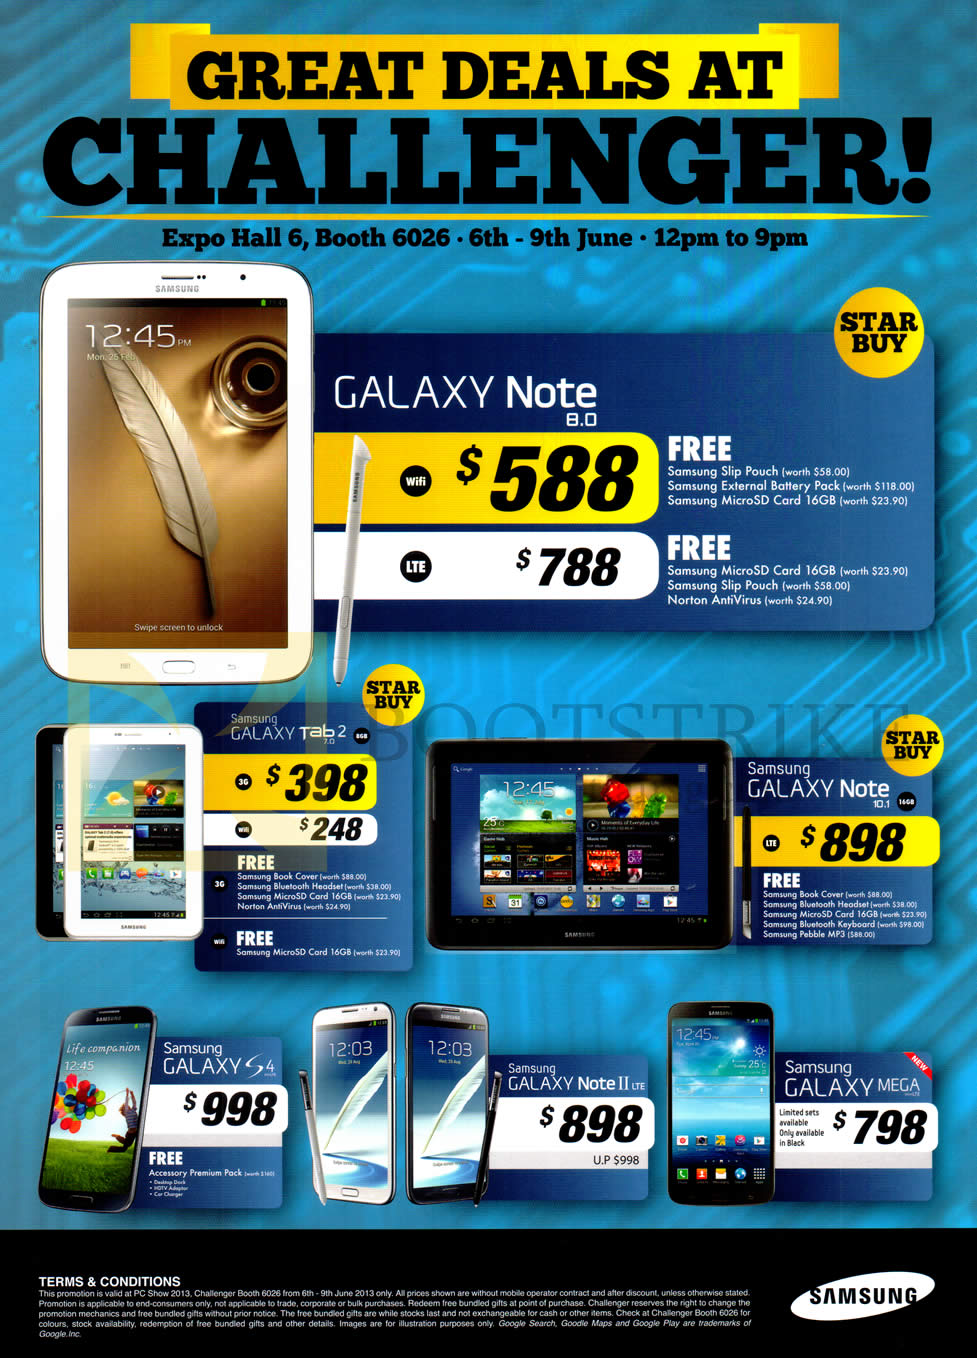 PC SHOW 2013 price list image brochure of Samsung Smartphones Tablets Galaxy Note 8.0, Tab 2, Note 10.1 LTE, S4, Note II LTE, Mega